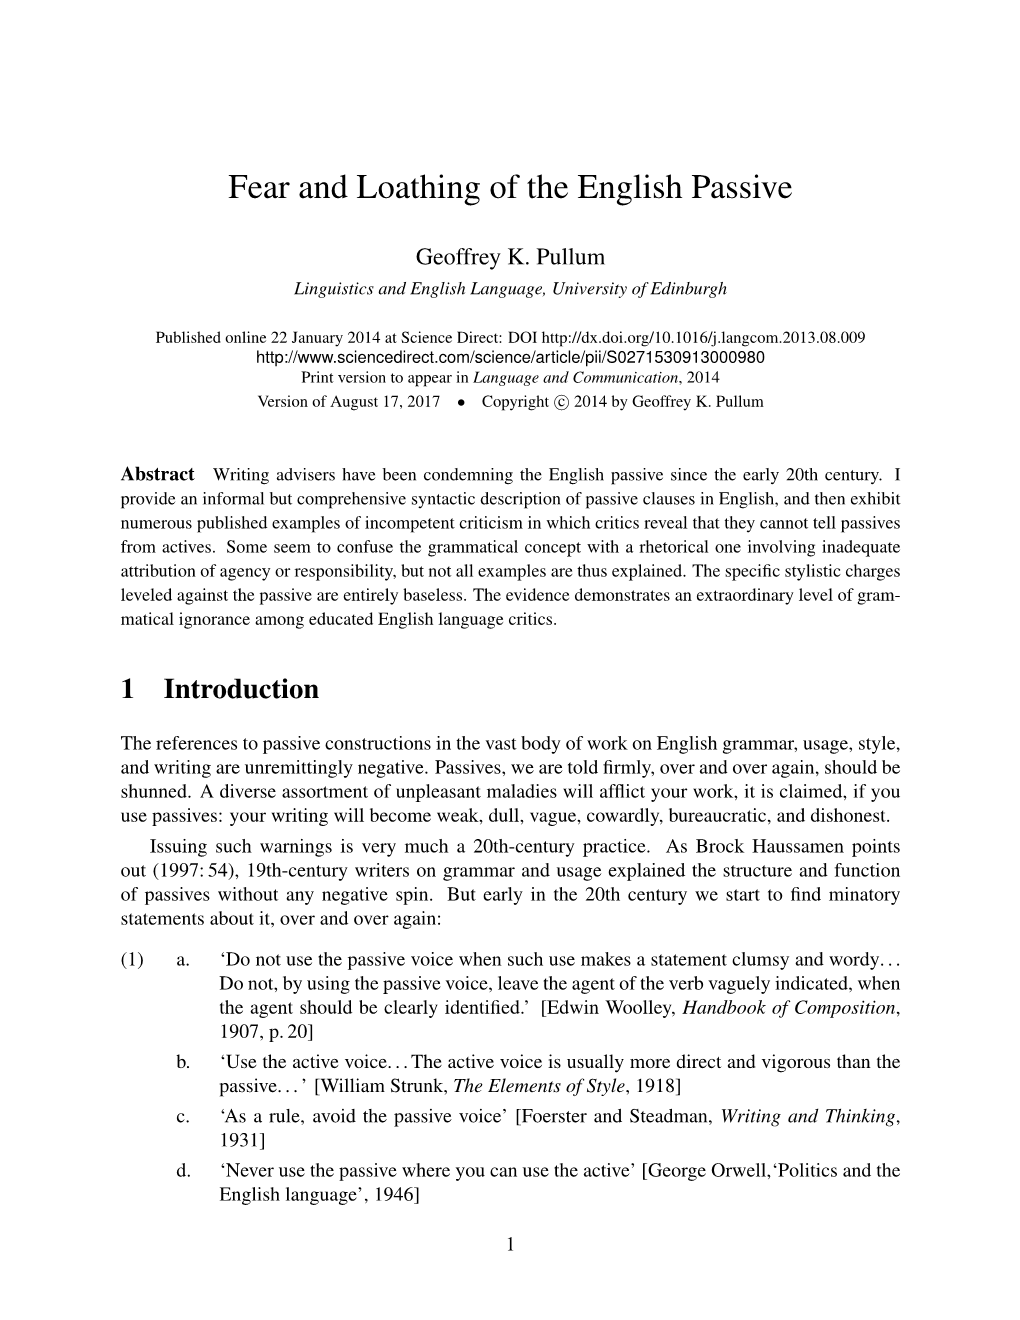 Fear and Loathing of the English Passive Voice